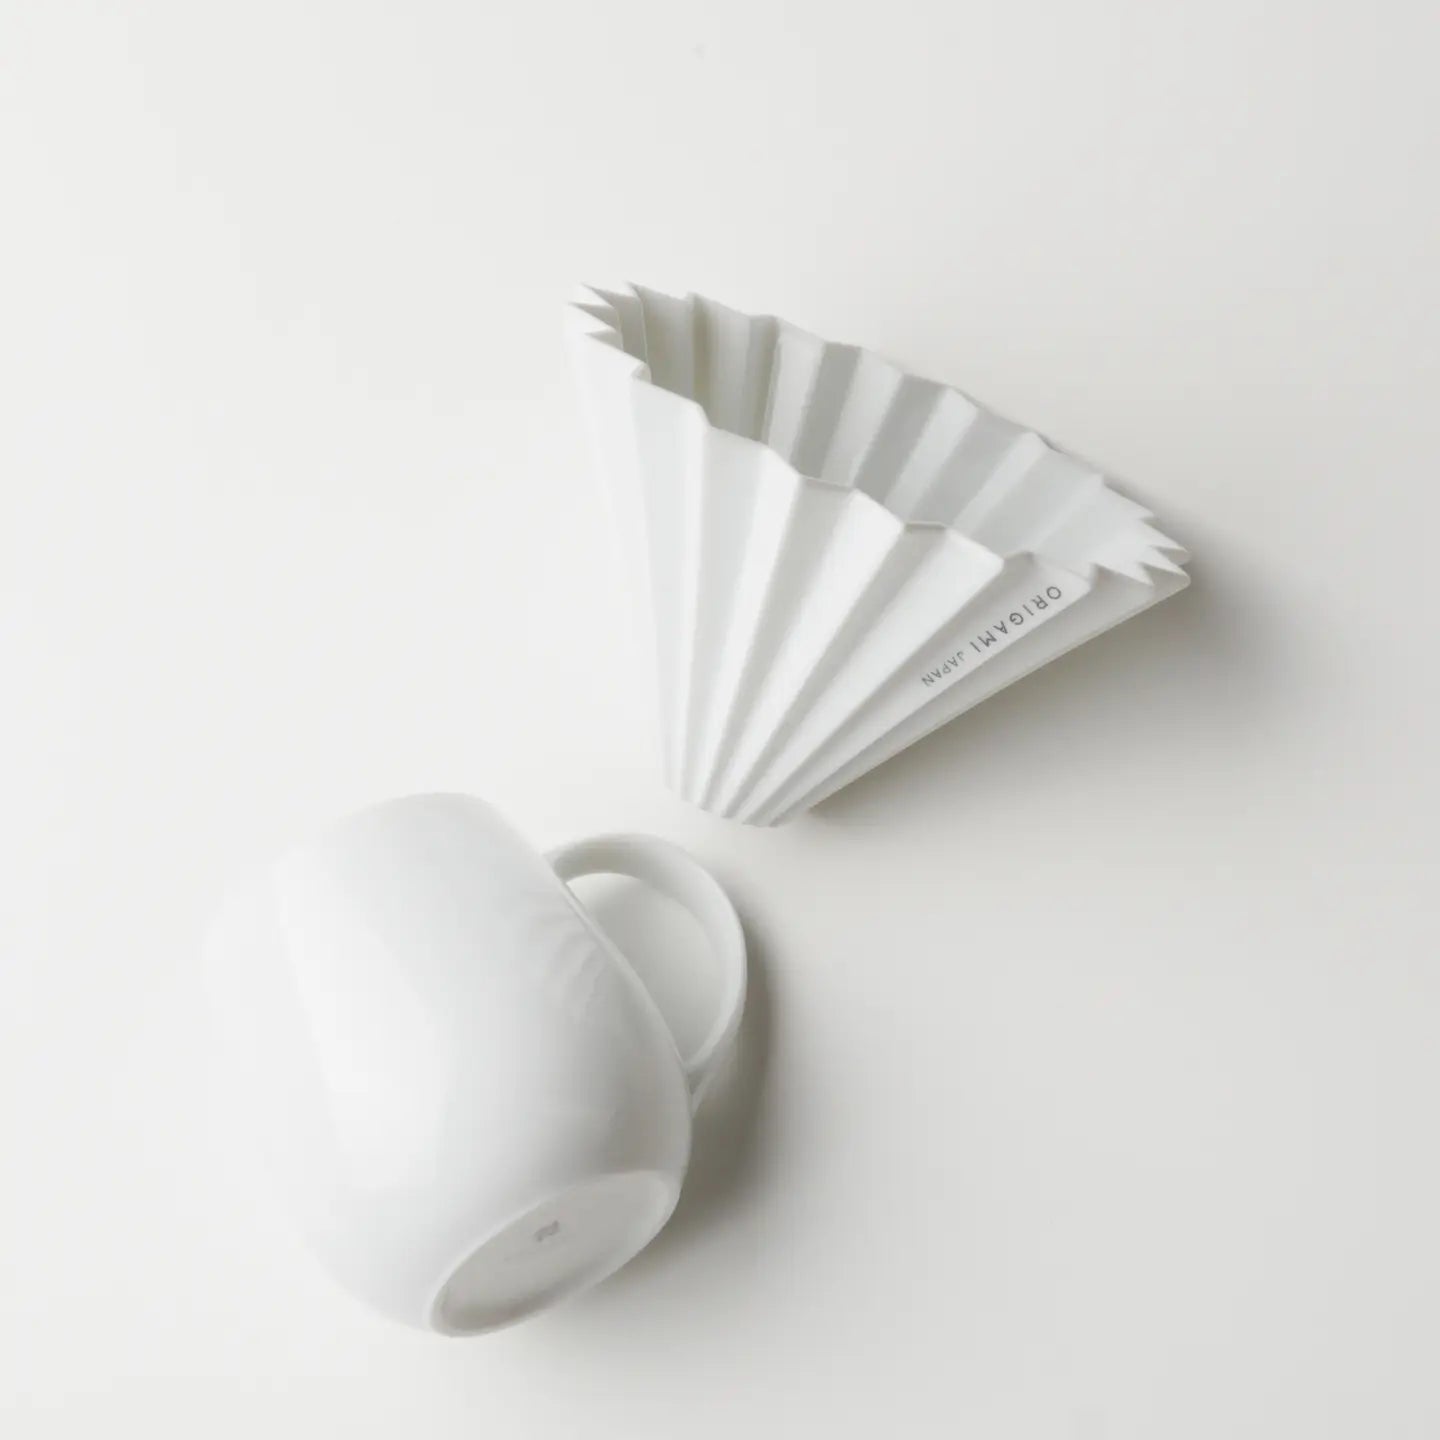 A white ORIGAMI Barrel Aroma Mug and a matching white porcelain ORIGAMI Coffee Dripper